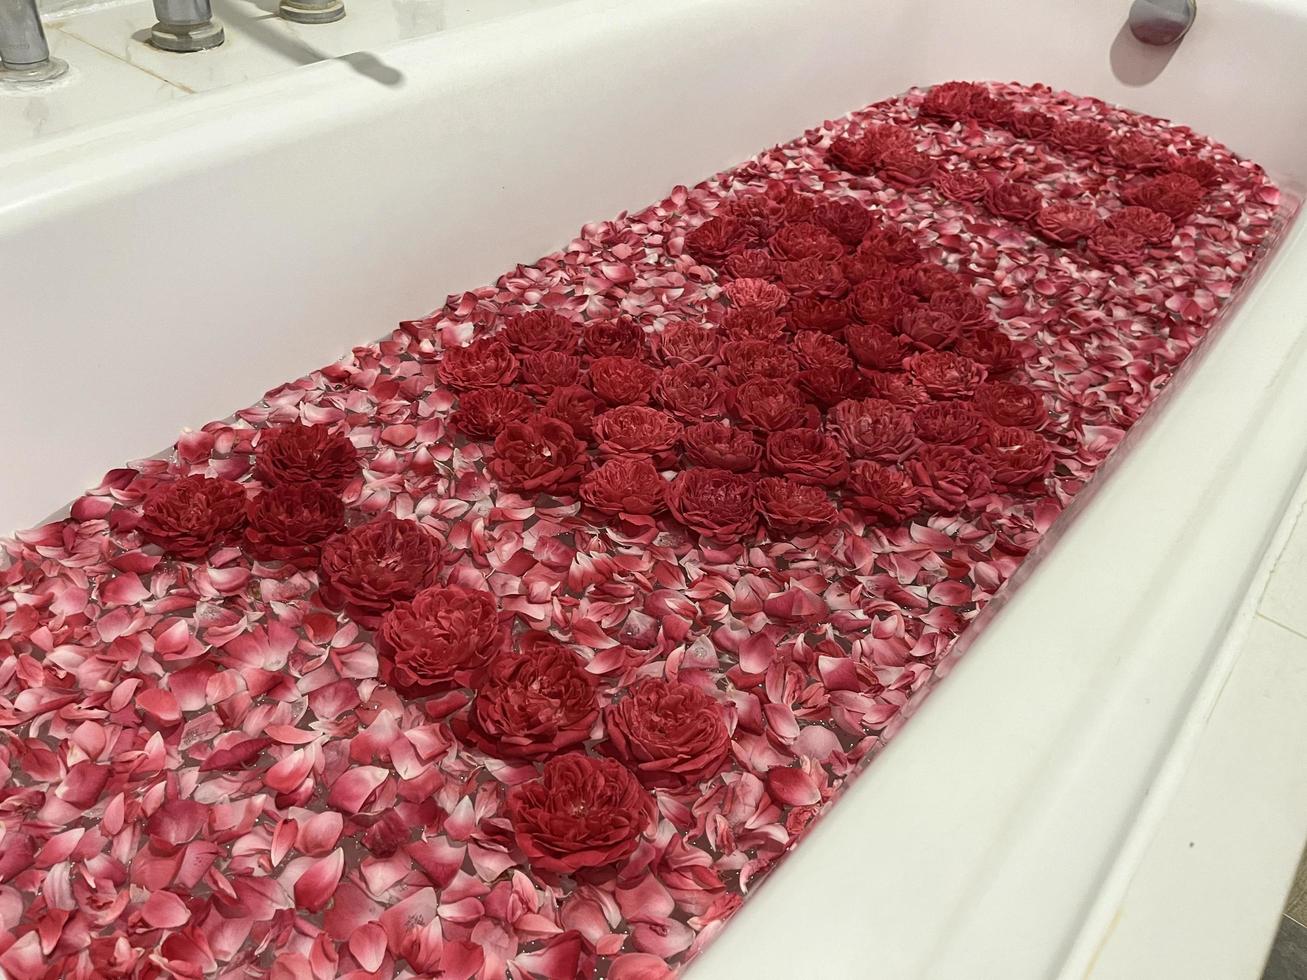 Rose decoration for rooms with a romantic concept. The seductive scent of roses. Roses are neatly arranged and decorated to form a heart. Hotel rooms are prepared for couples going on their honeymoon. photo